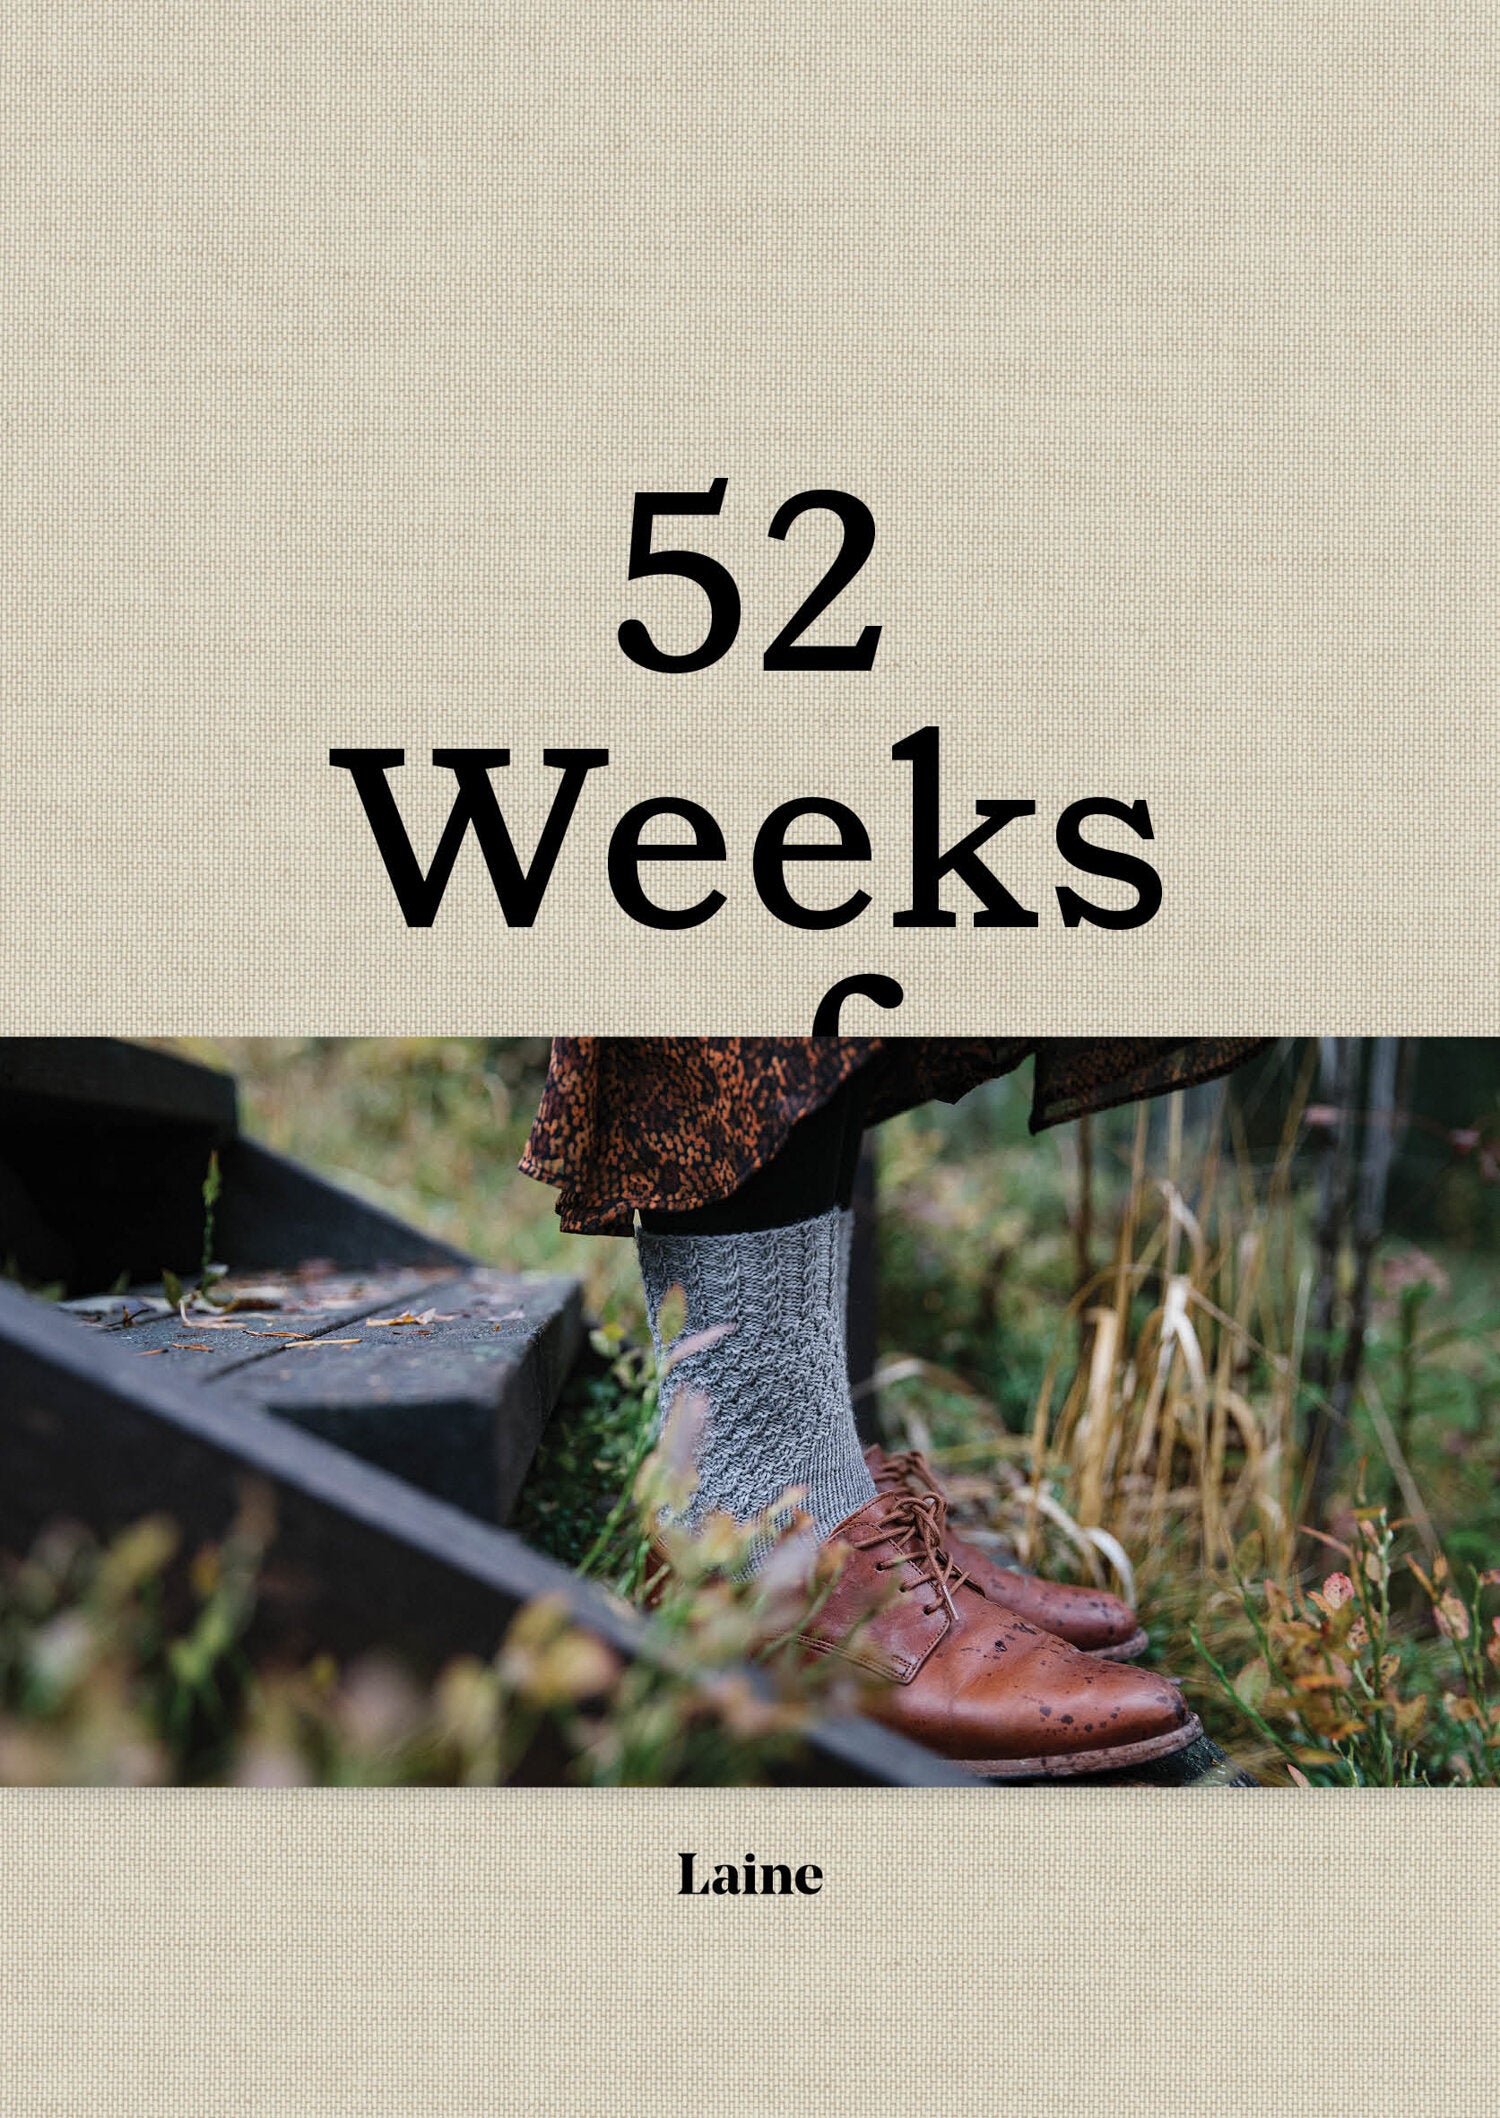 Laine 52 weeks of socks is available to buy online from UK wool shop, Ida's House.